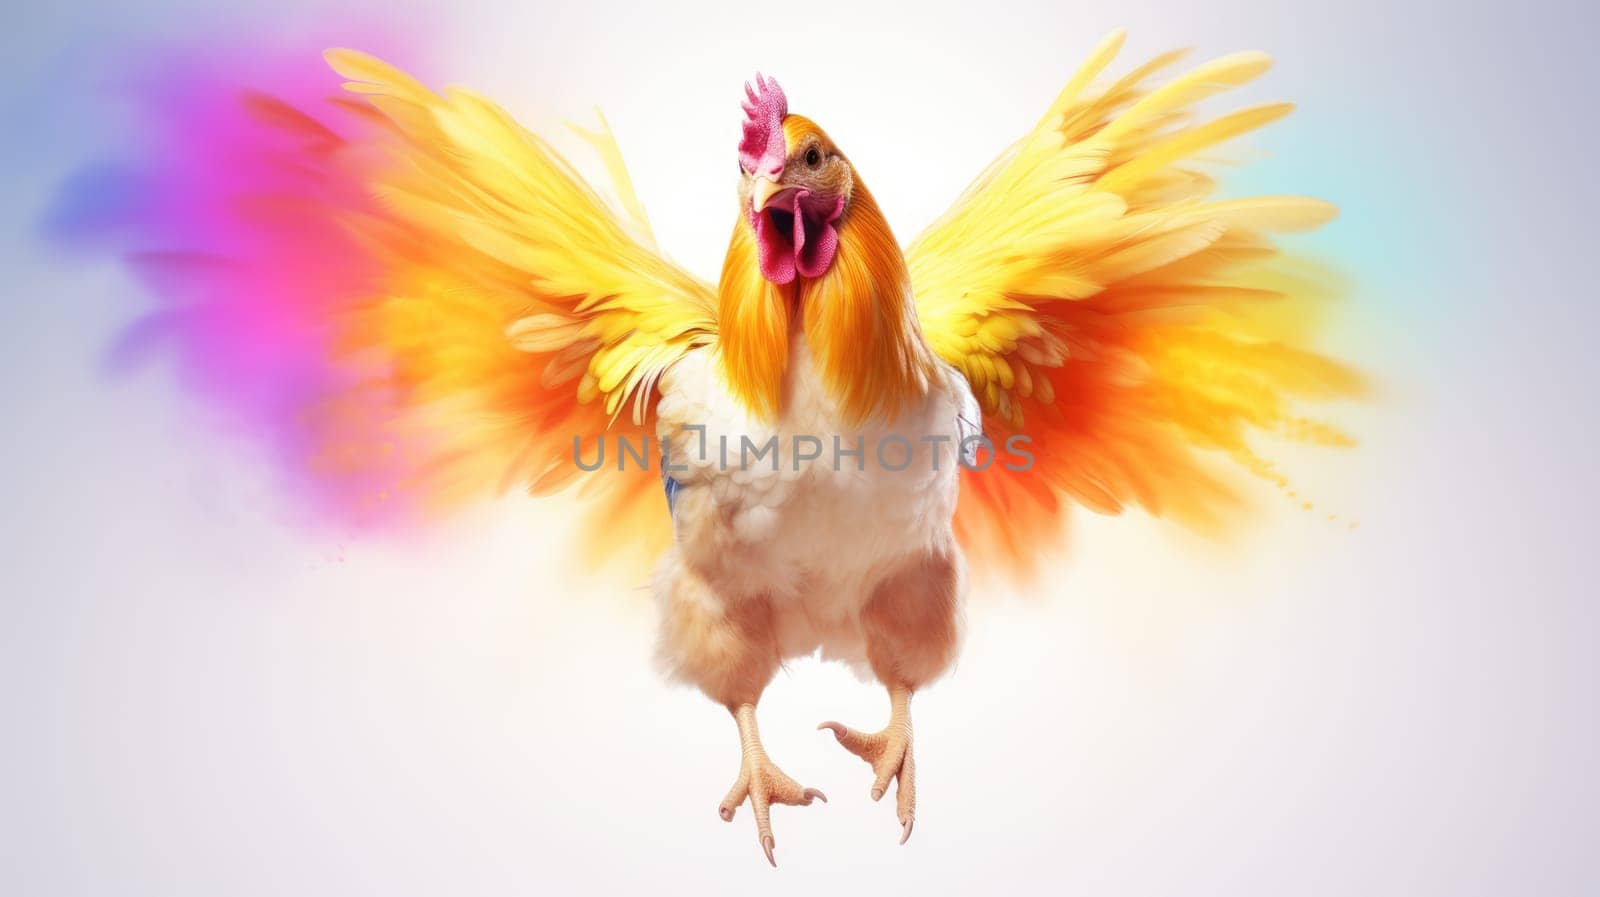 Vibrant chicken flying with colorful rainbow feathers in the sky on bright background by JuliaDorian